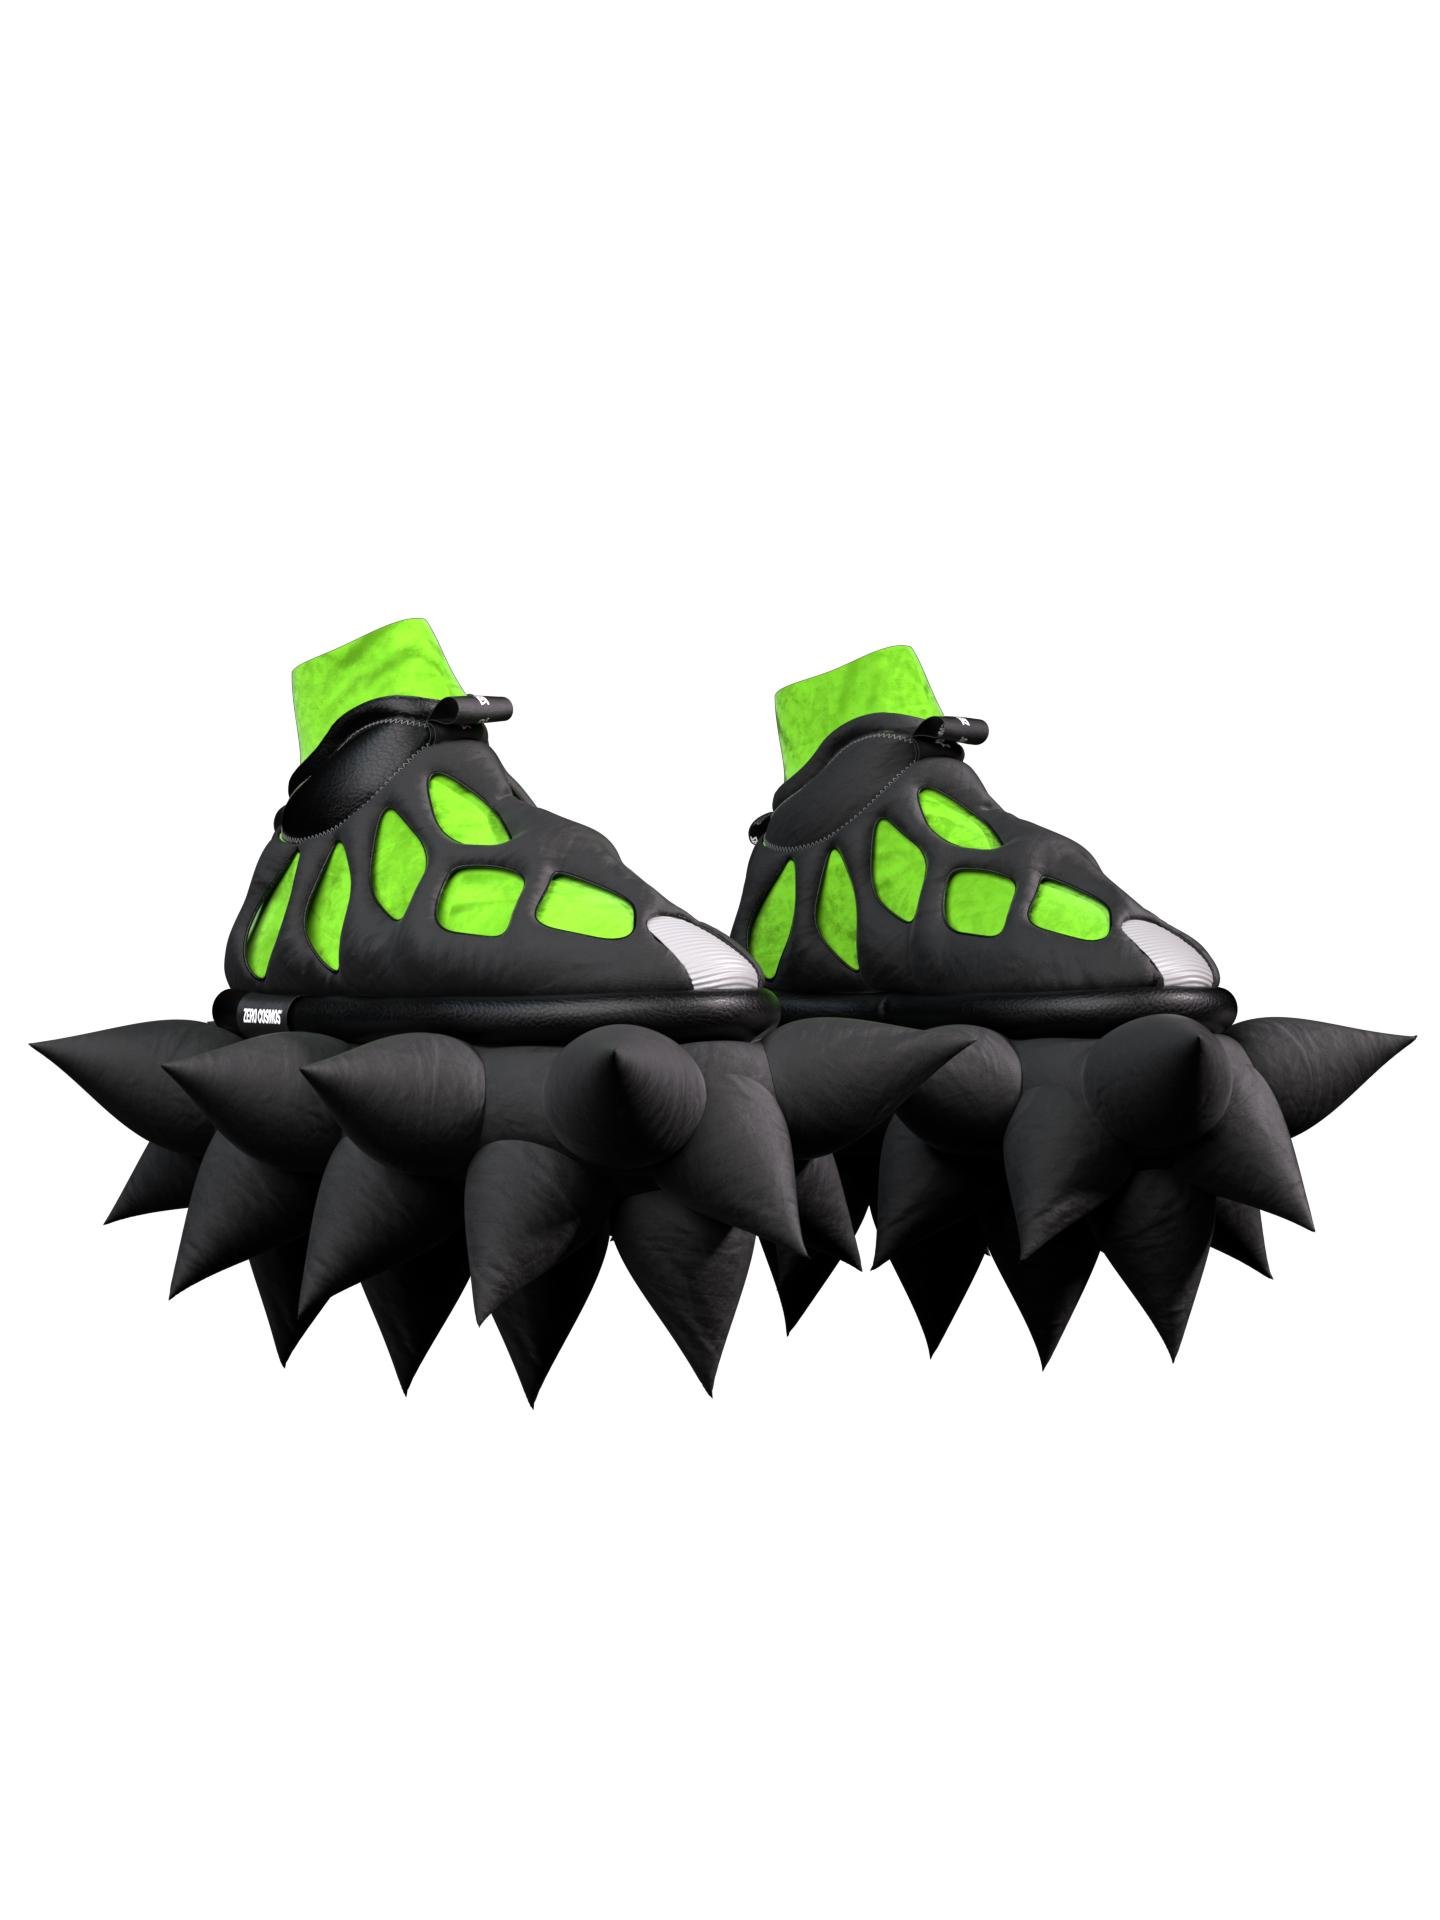 Inflatable Teeth Shoes Green by ZERO COSMOS